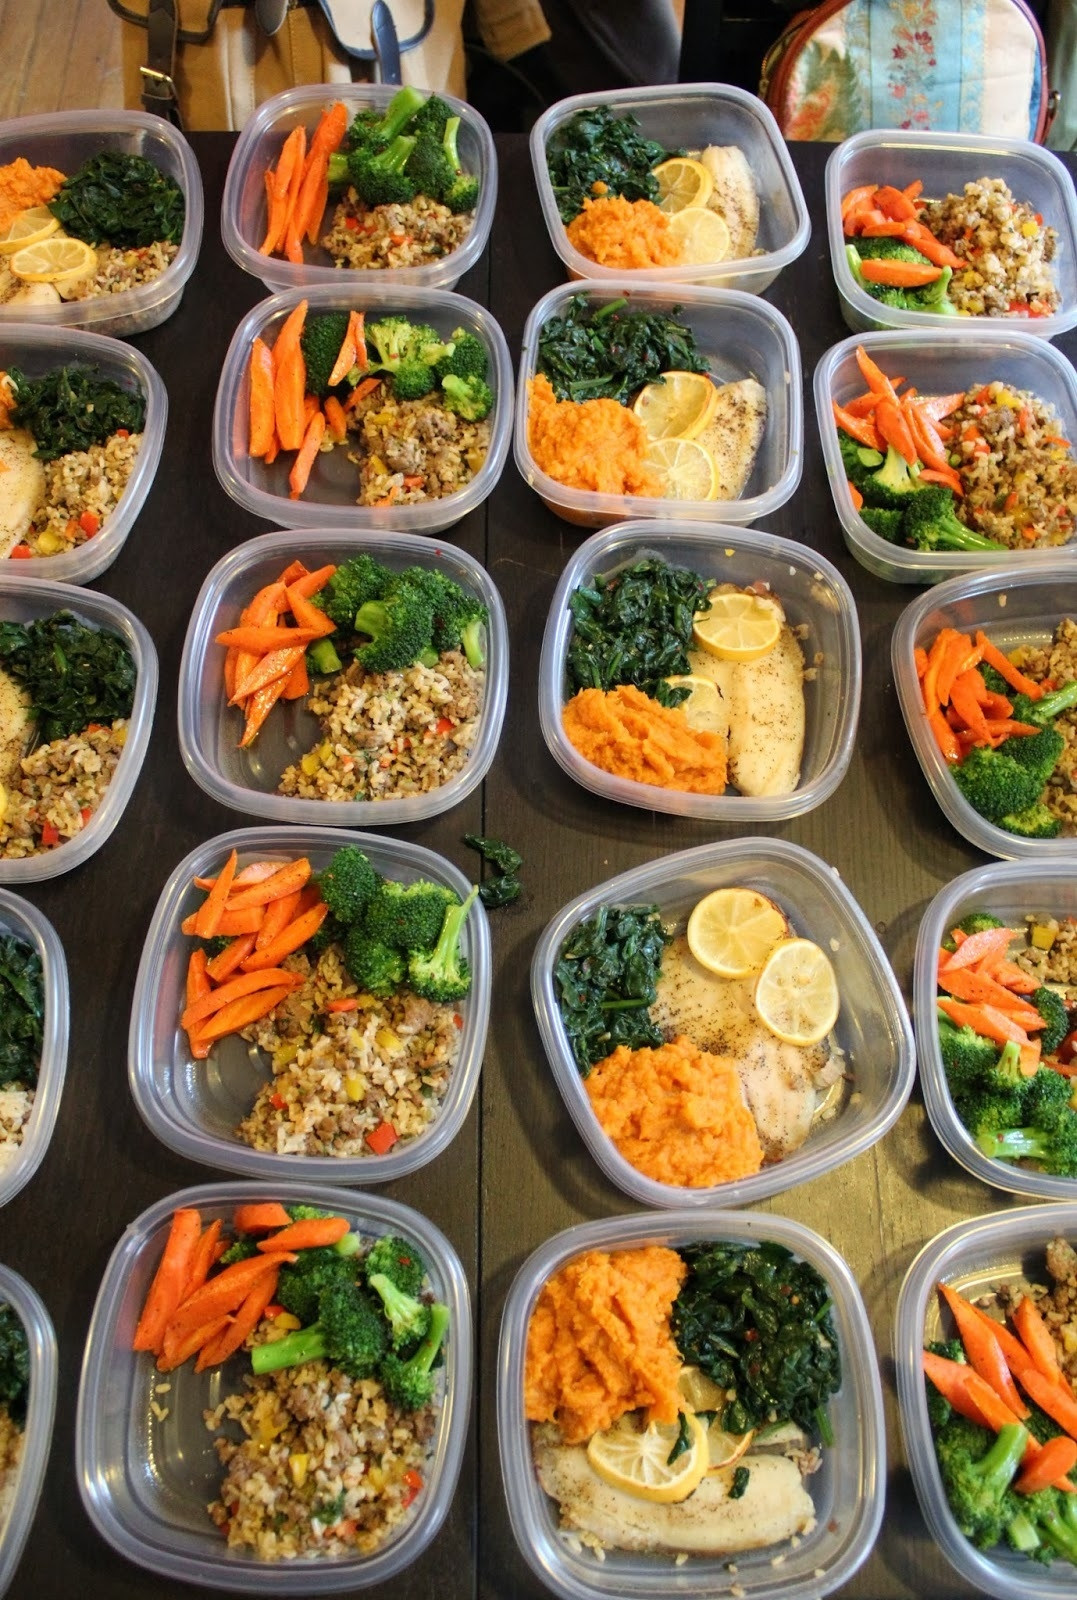 Healthy Easy Lunches
 Healthy Meal Prep Ideas For The WeekWritings and Papers